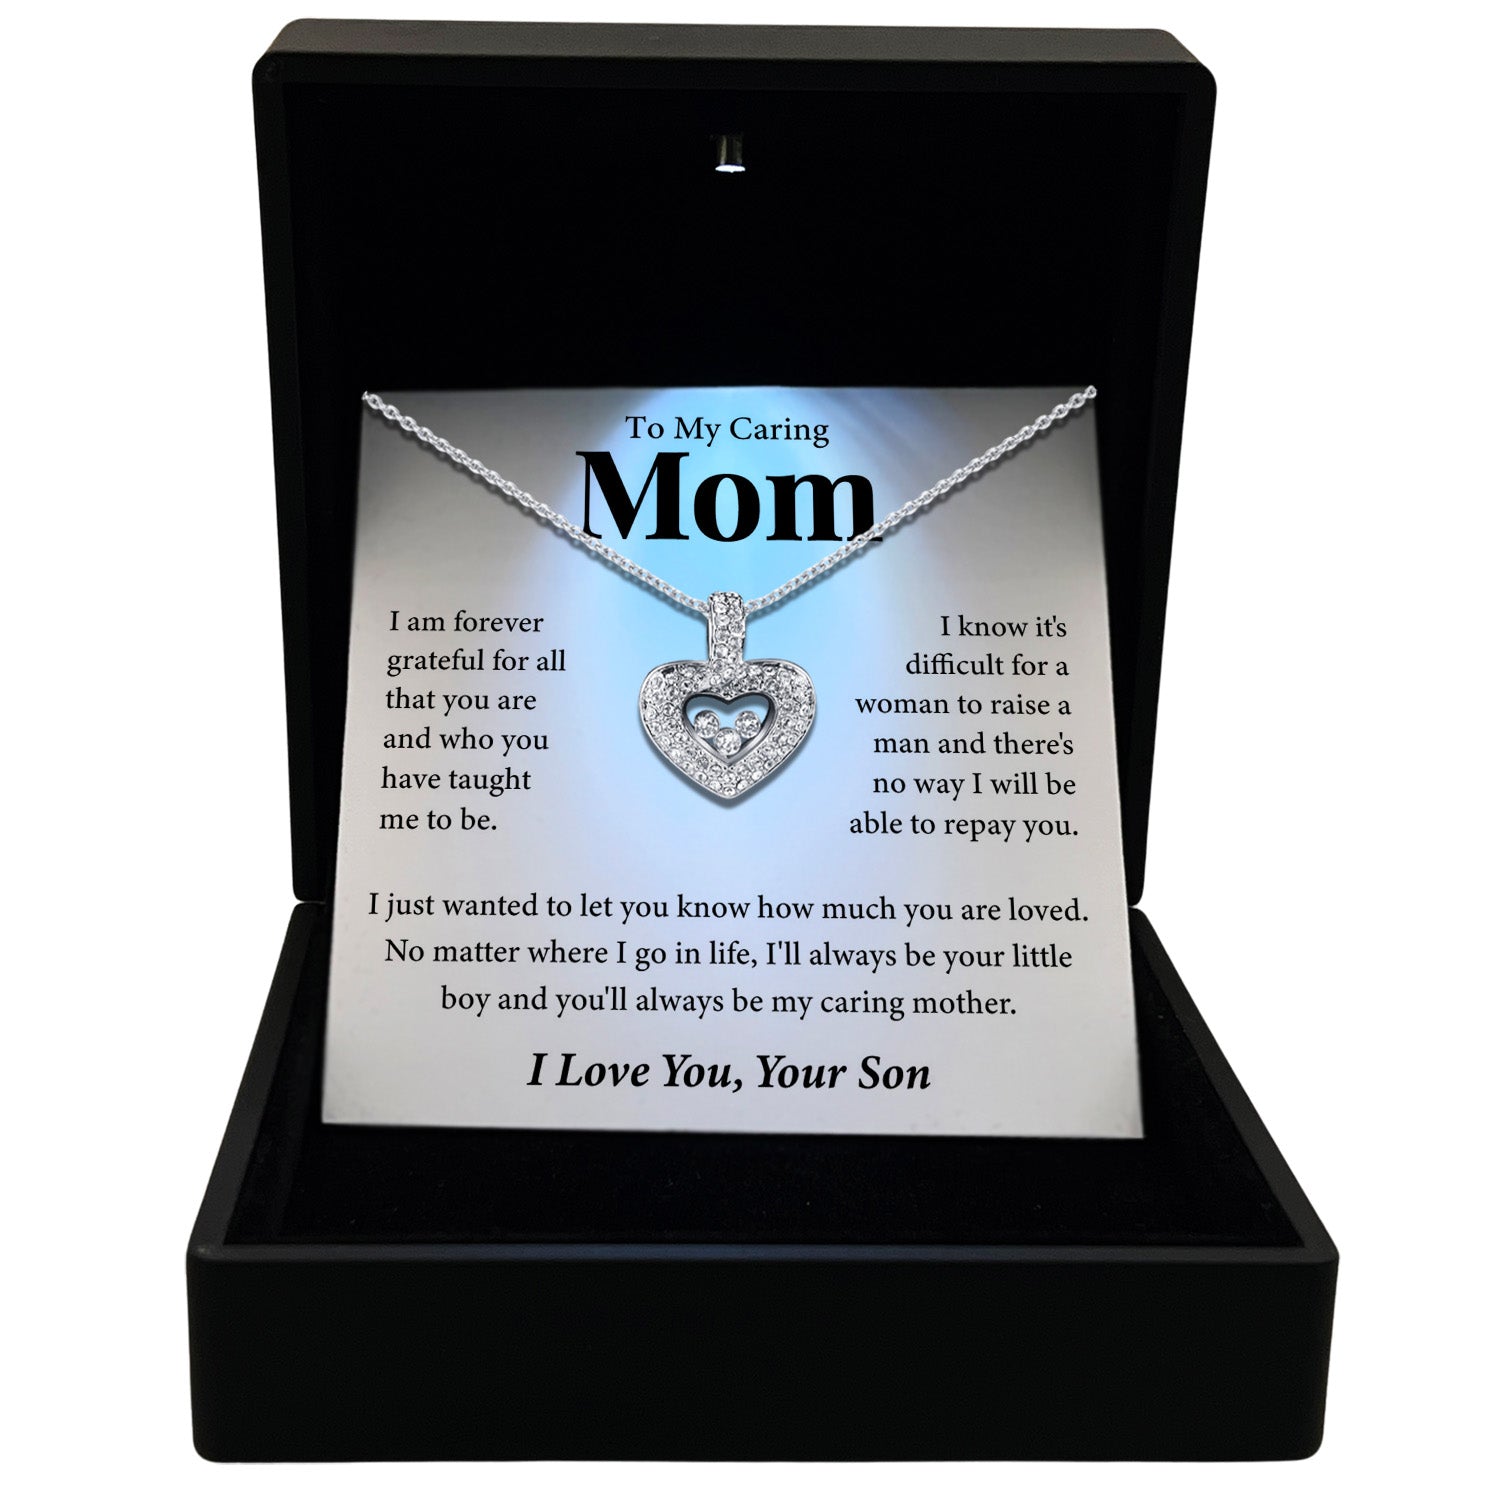 To My Caring Mom - I Love You Mom - Tryndi Floating Heart Necklace